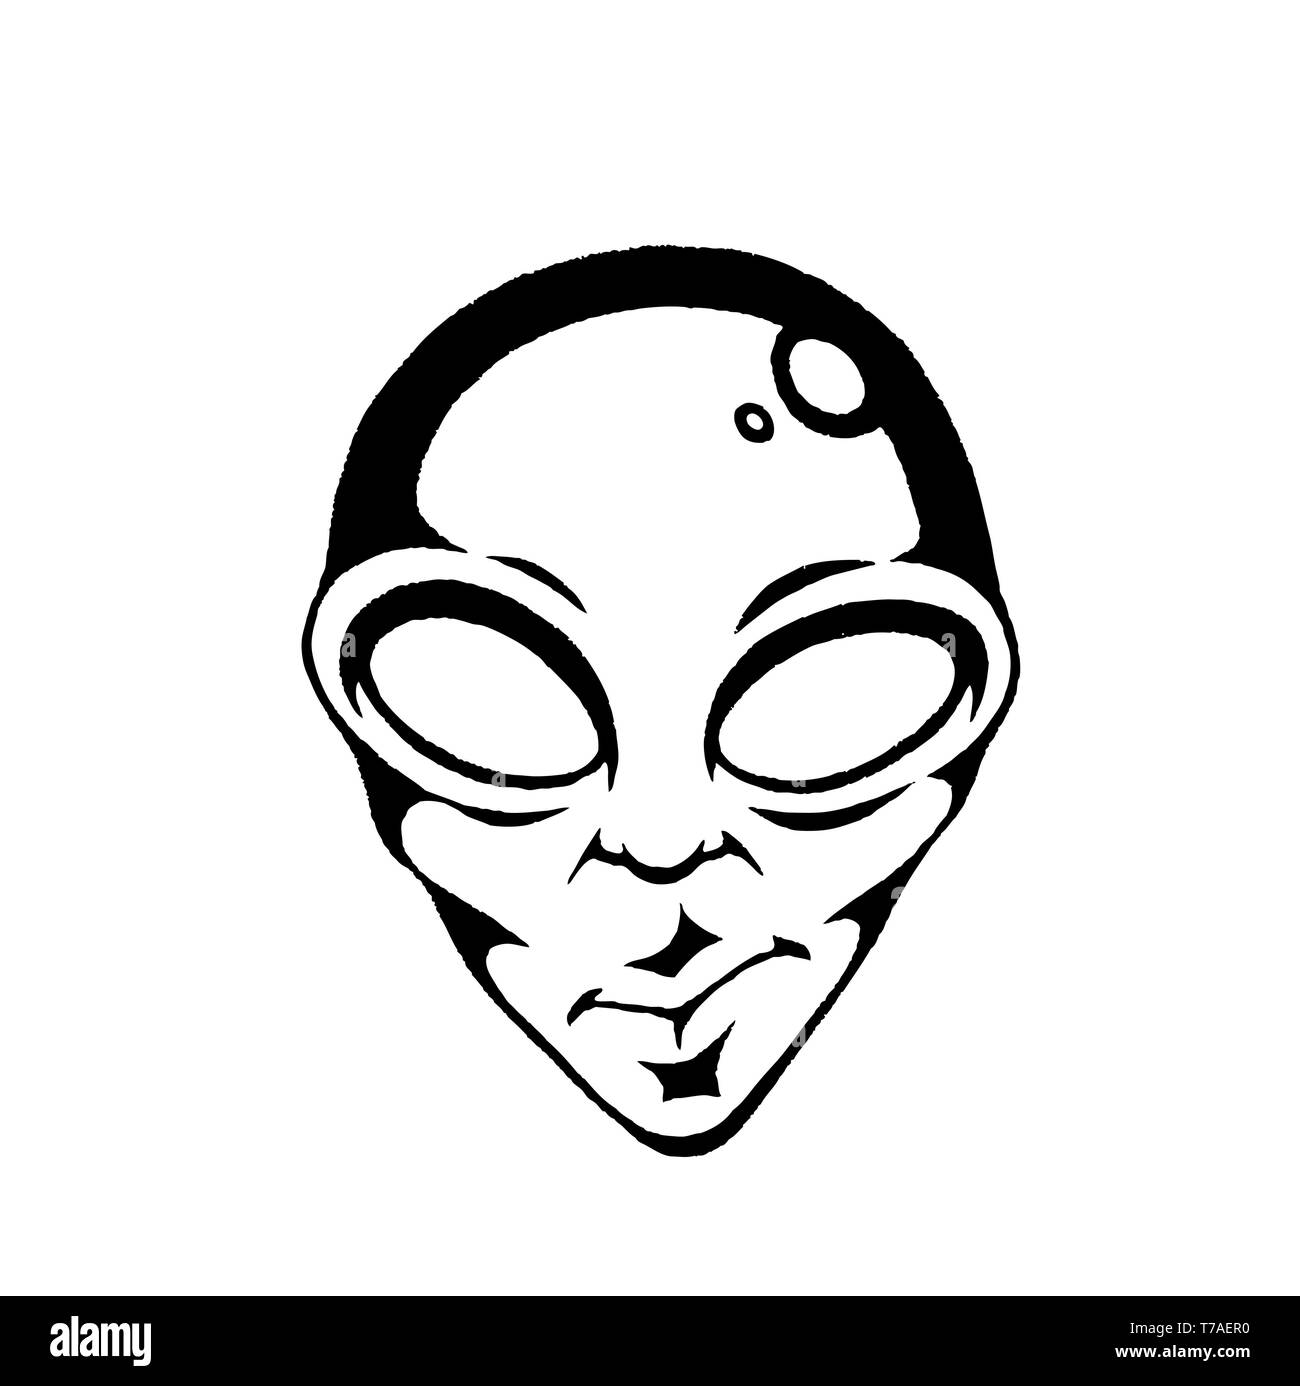 Vector Illustration of a Scratchboard Style Ink Drawing of an Alien Face Stock Photo